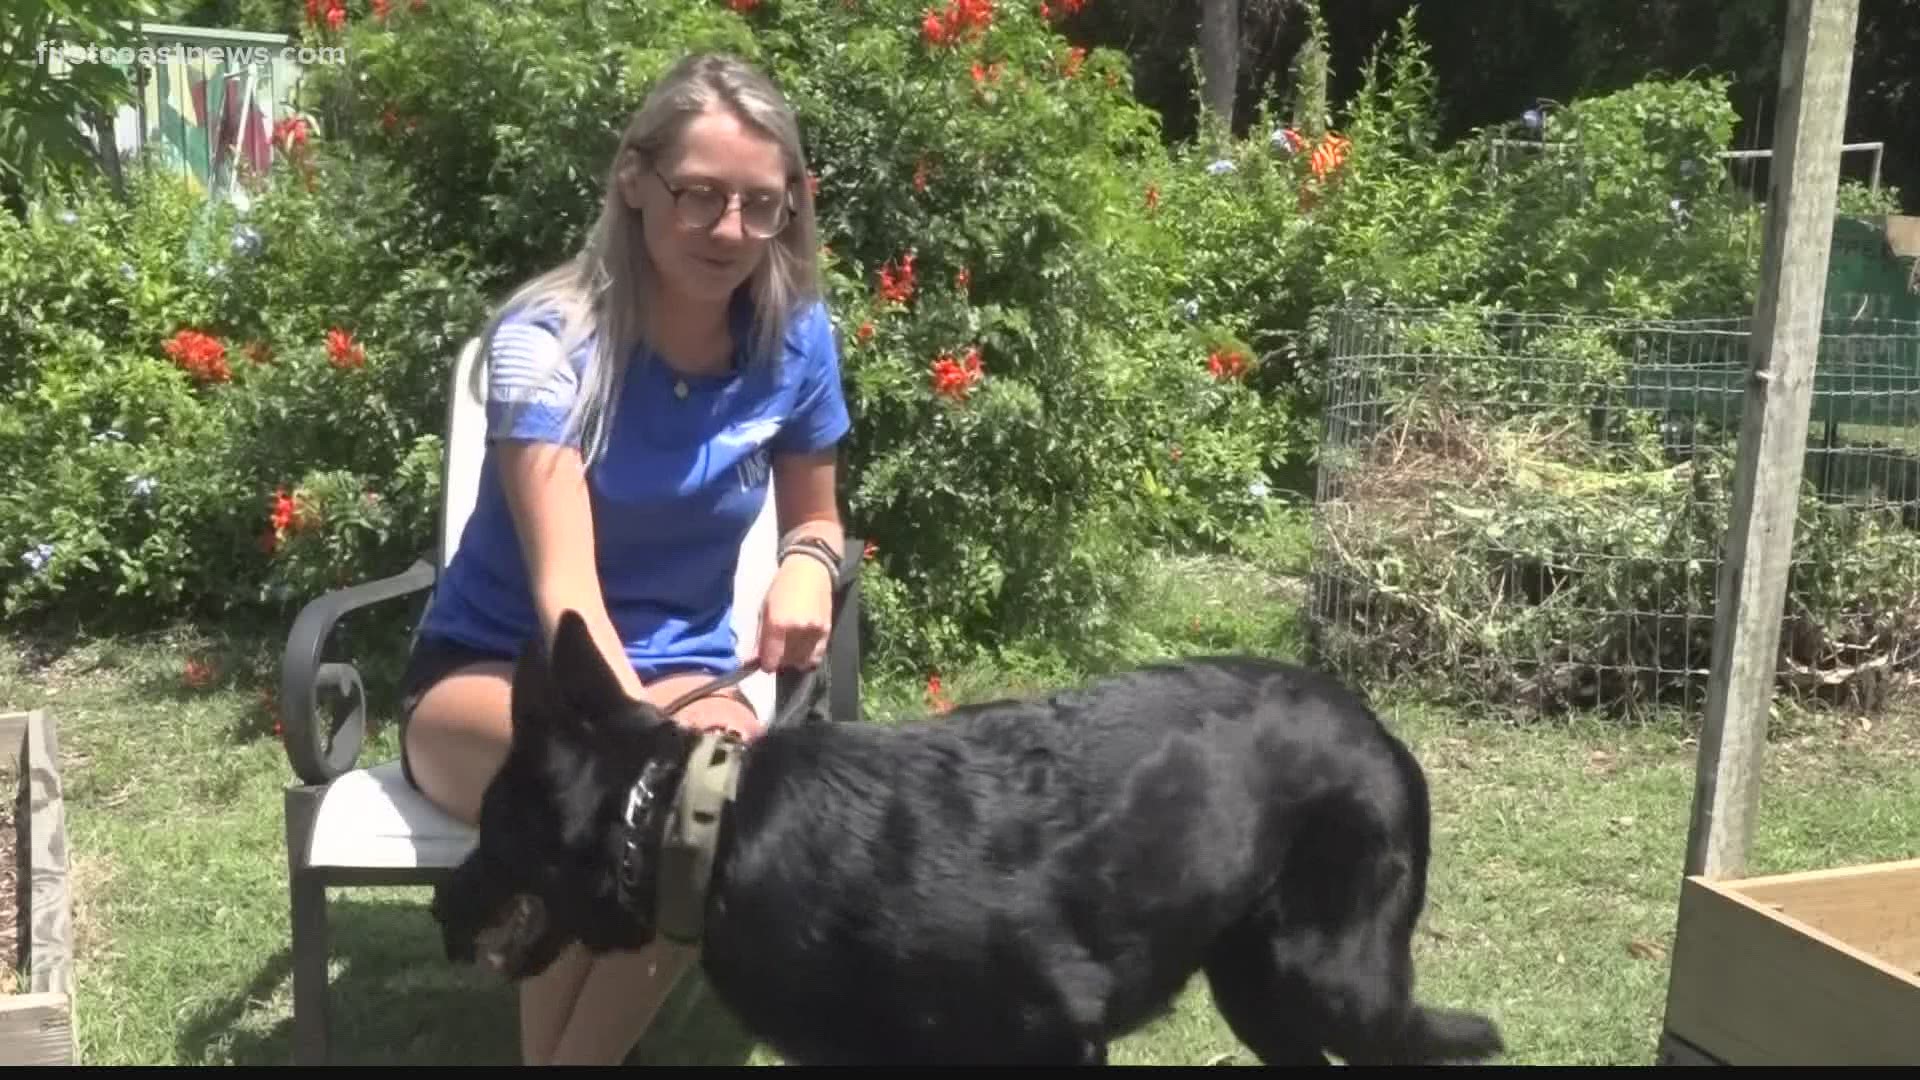 'Cass is home!': St. Augustine Beach woman reunited with lost dog 900 miles away